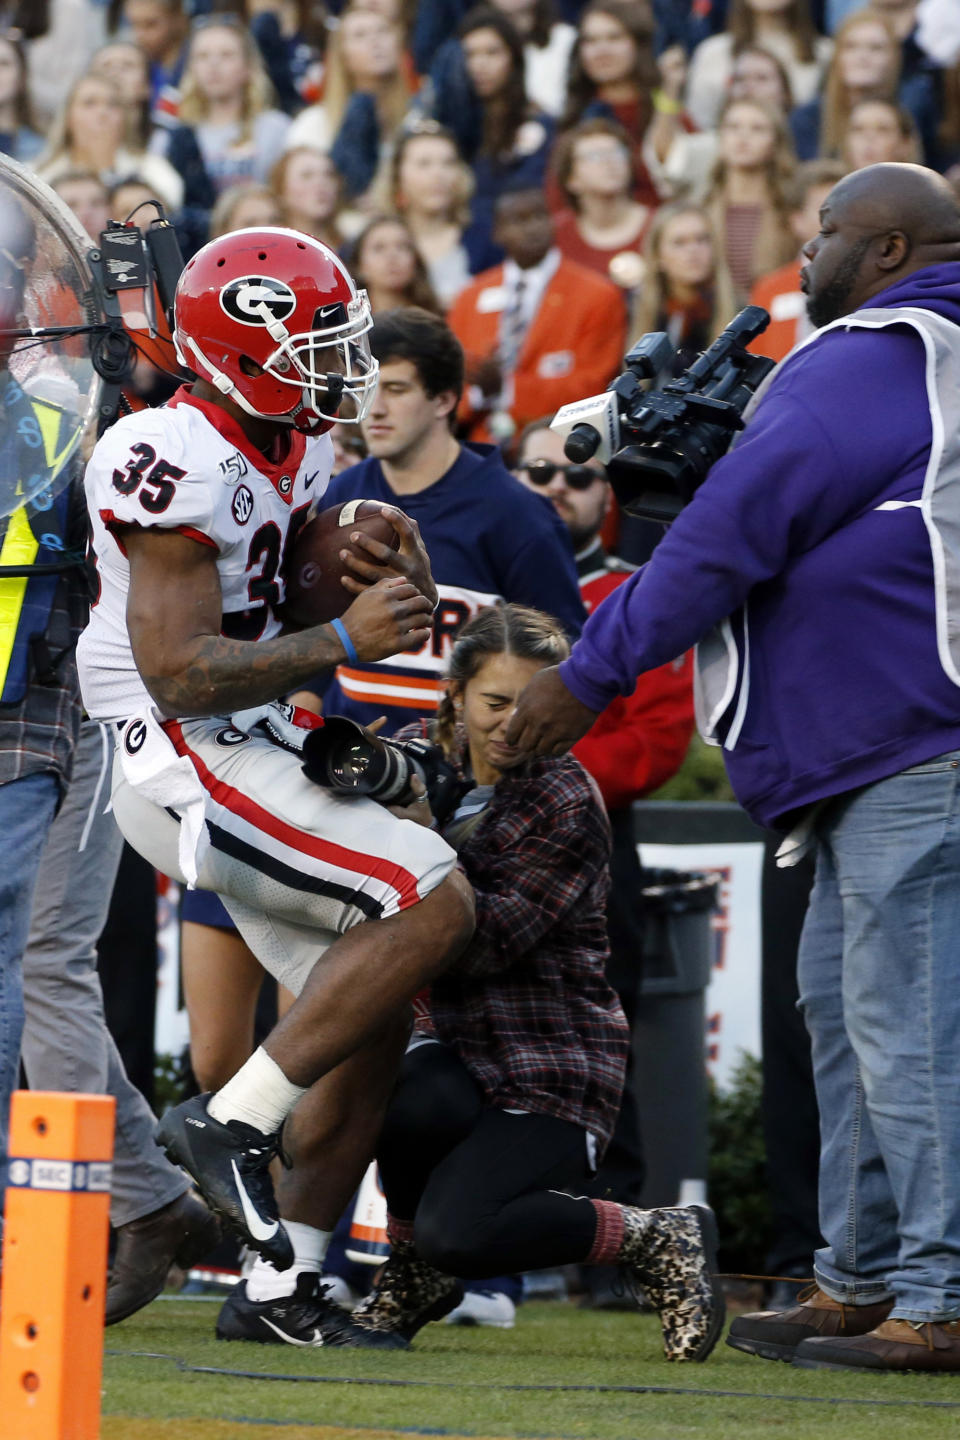 Georgia running back Brian Herrien (35) runs out of bounds and into a photographer during the first half of an NCAA college football game against Auburn, Saturday, Nov. 16, 2019, in Auburn, Ala. (AP Photo/Butch Dill)